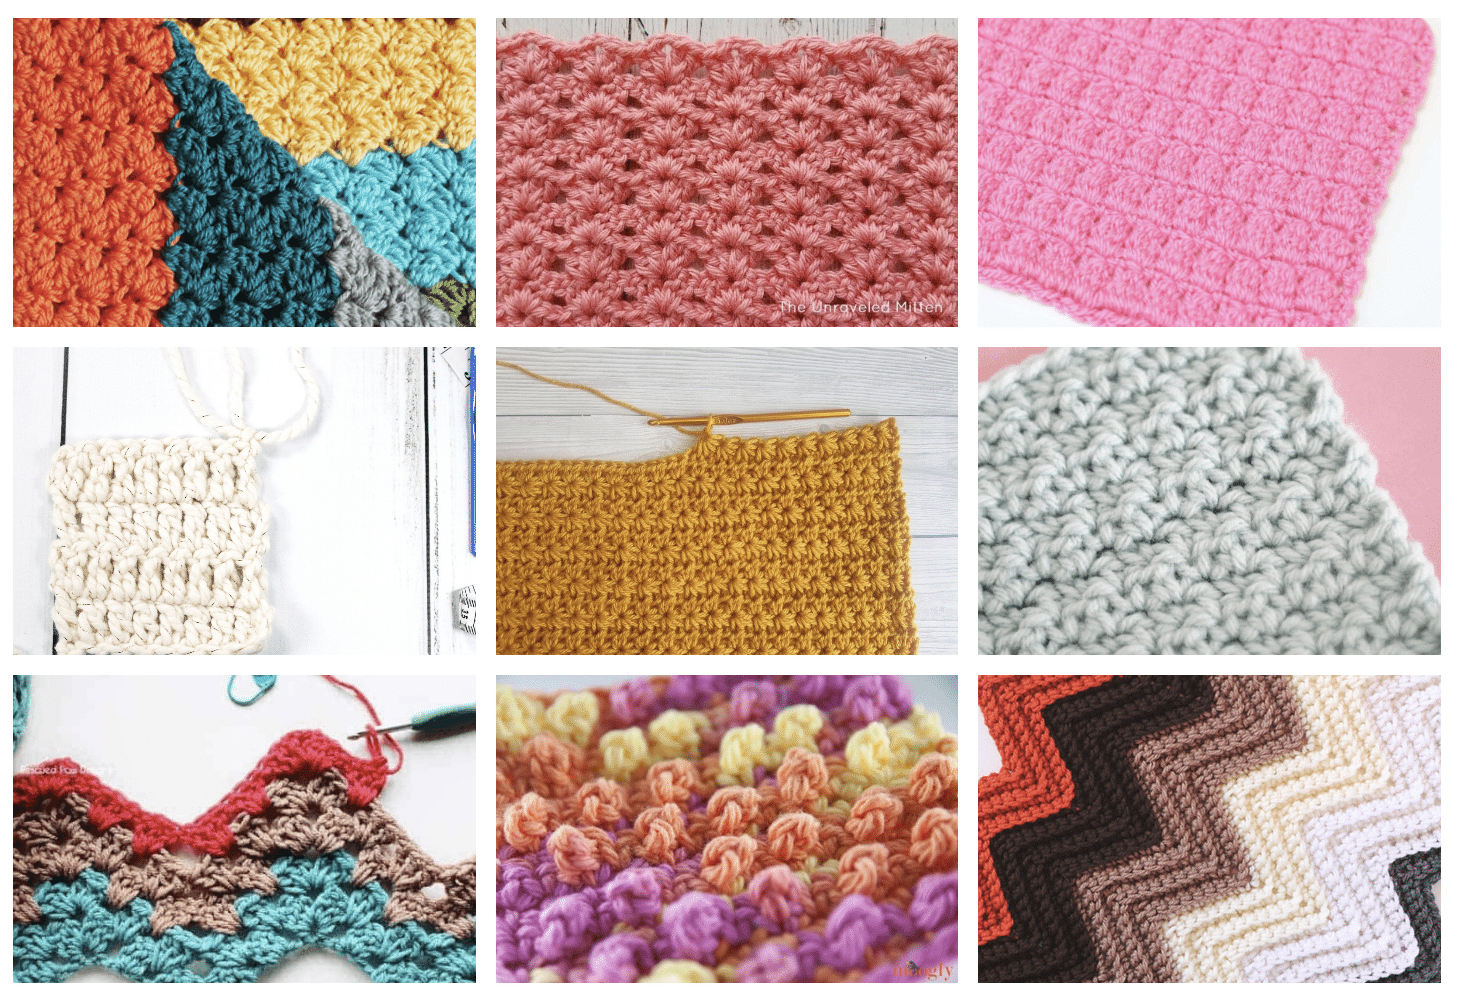 30 Amazing Crochet Bag Patterns of All Kinds - (Free!) 